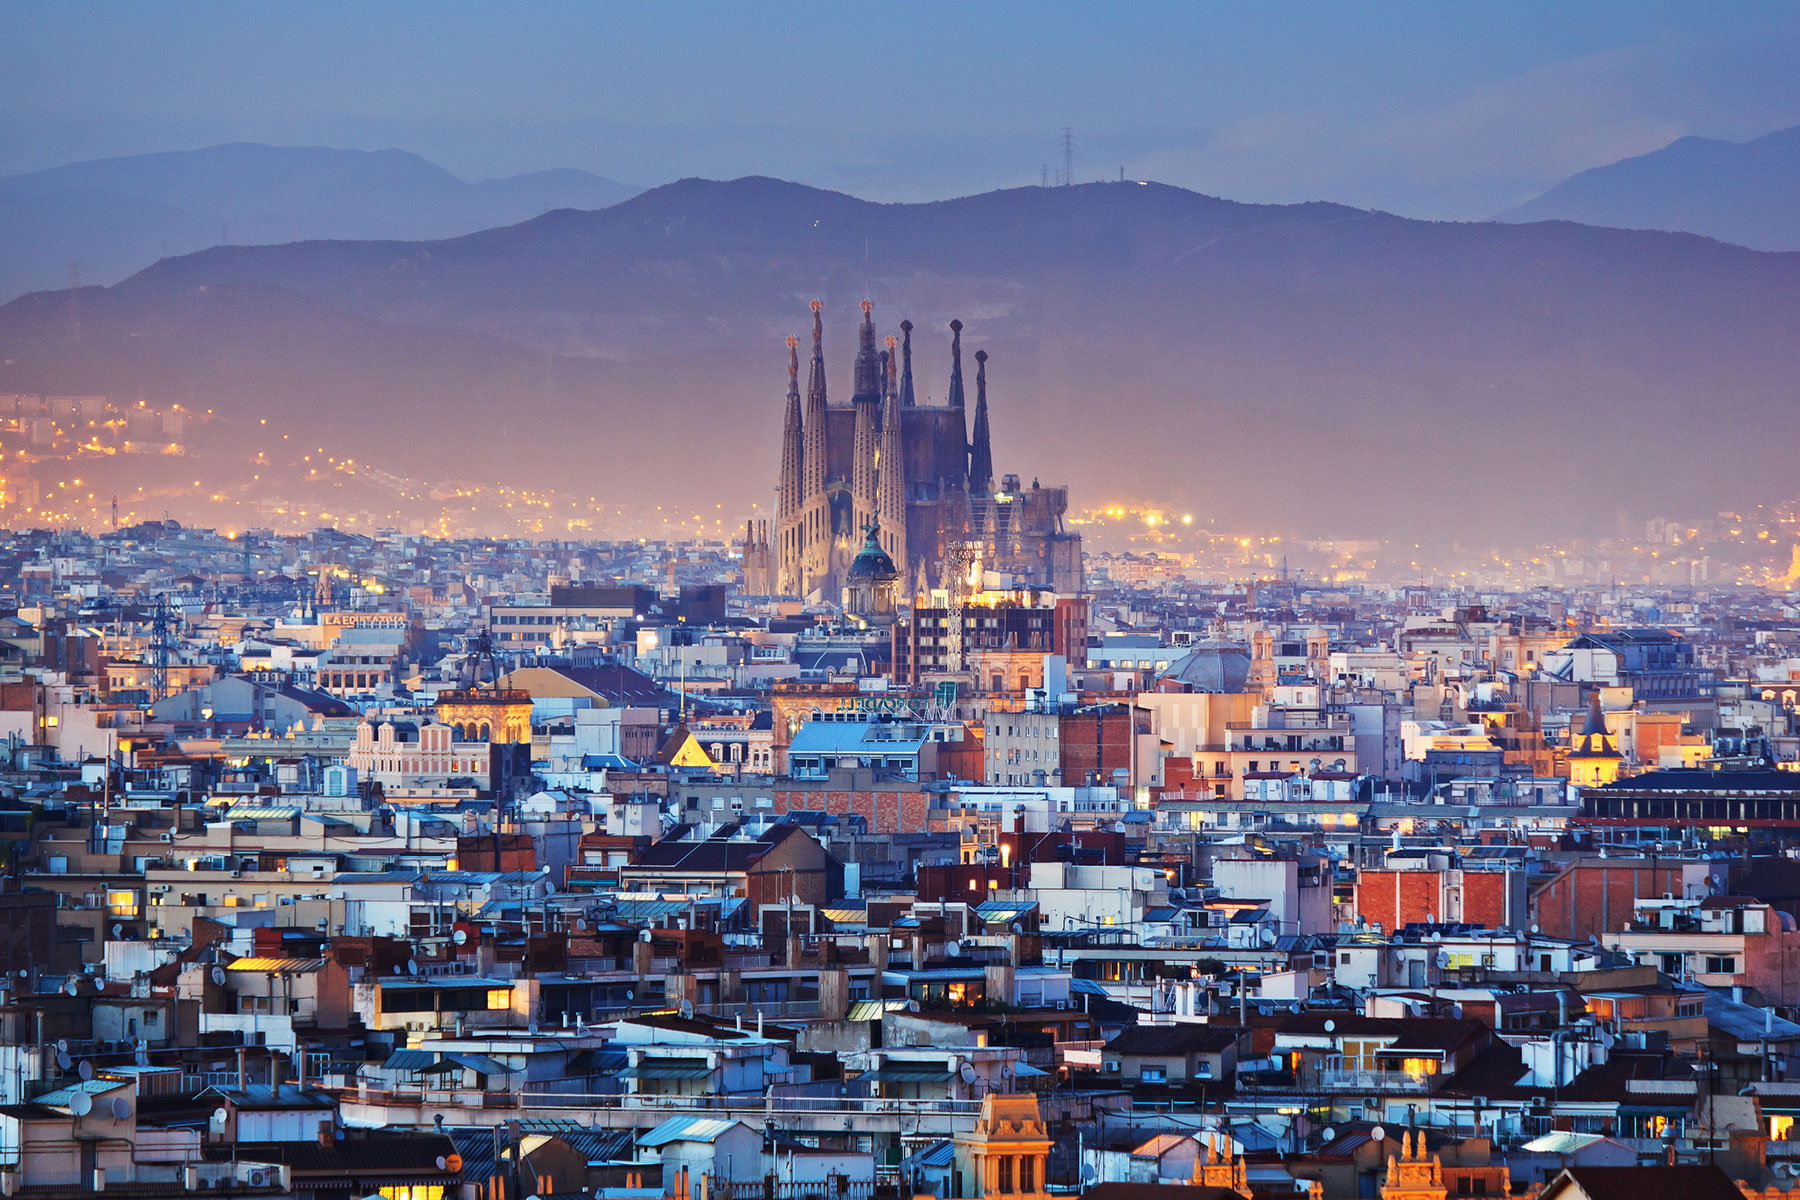 Europeans are flocking to Spain